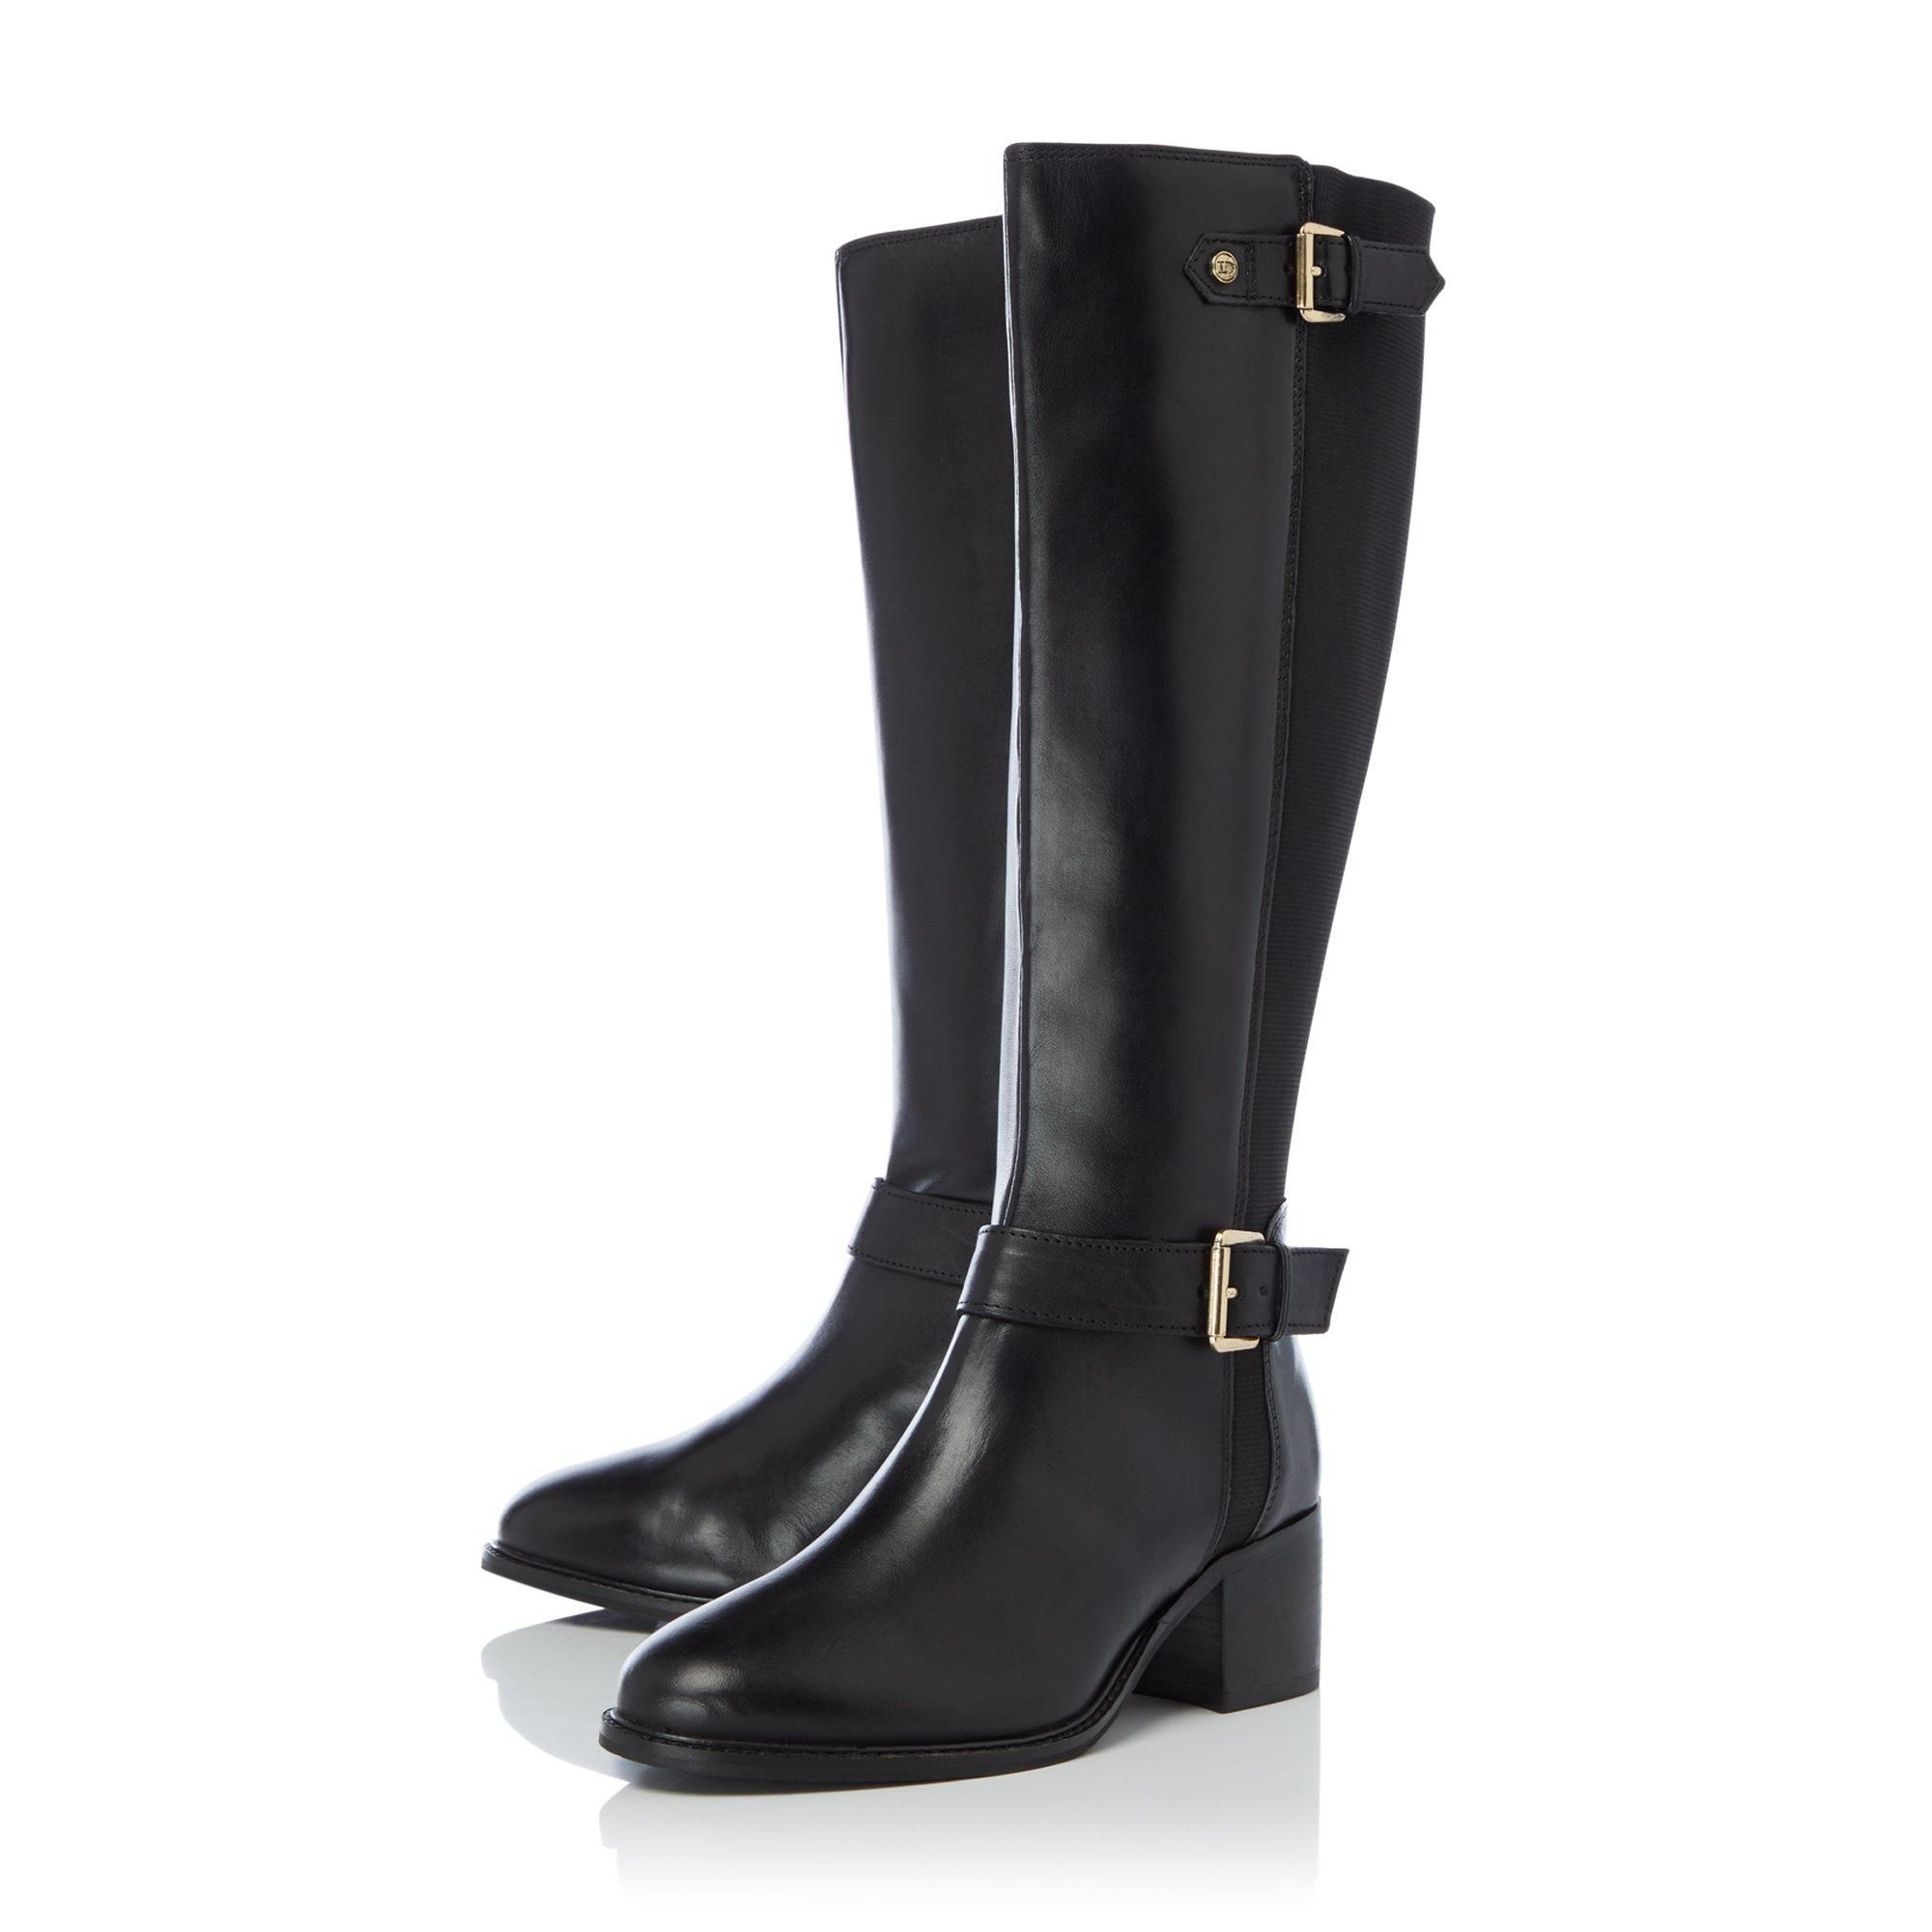 Get ready for winter with Dune London's wide fit Tildas boots. They're cut to a calf length and detailed with metallic buckles. A low block heel completes the design.